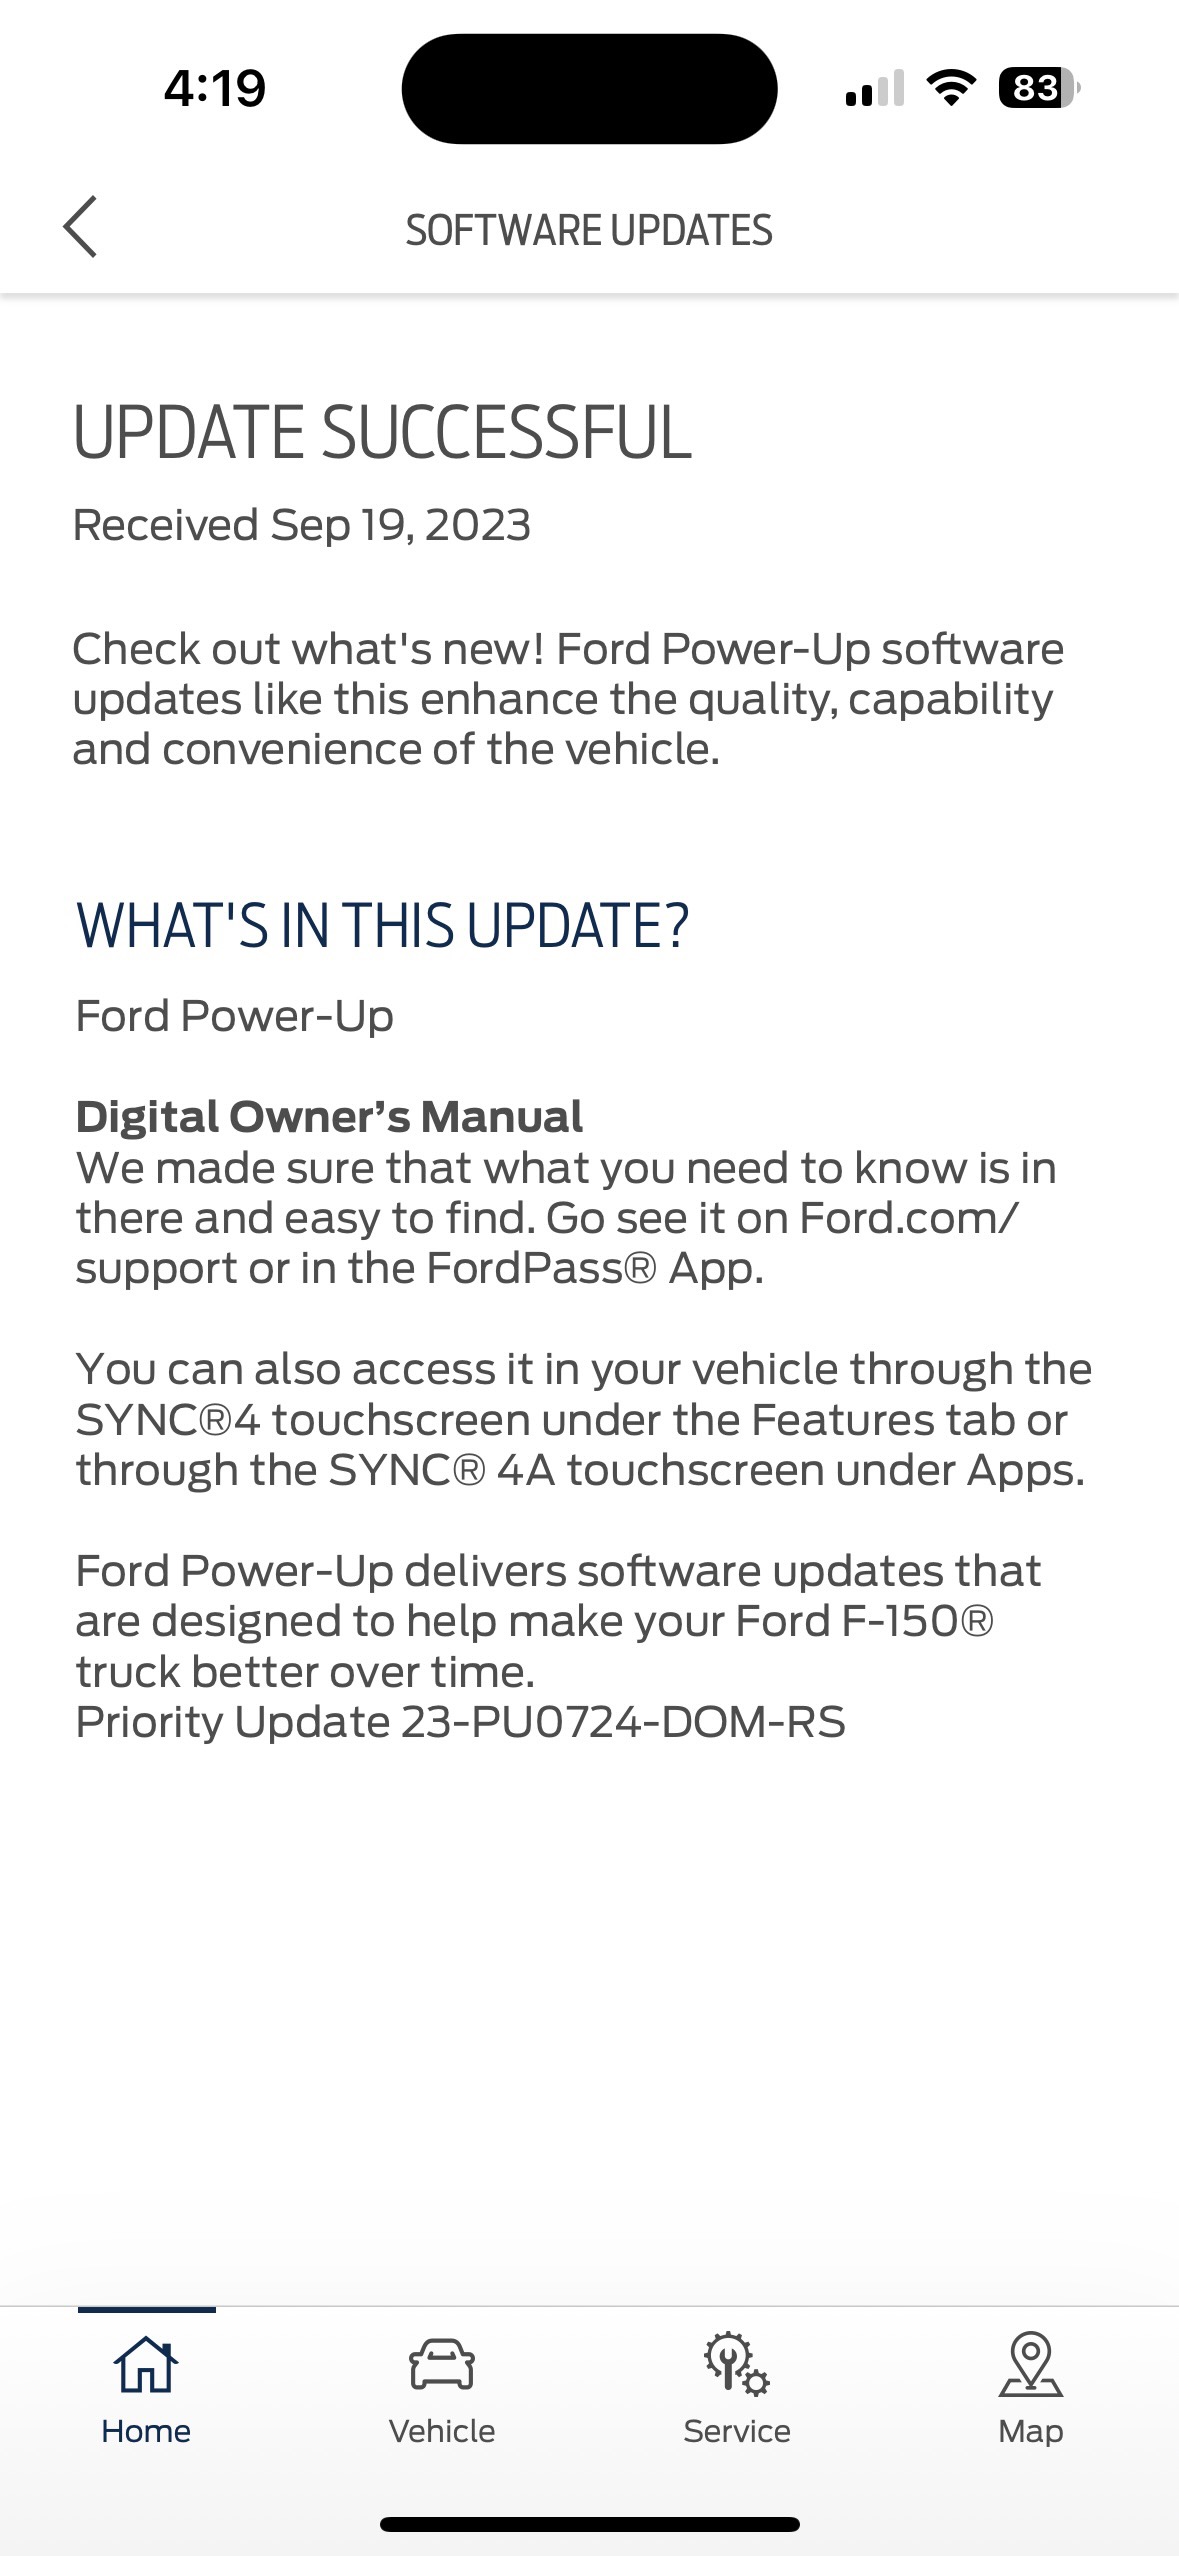 Ford F-150 Priority Update 23-PU0724-DOM-RS test - 1